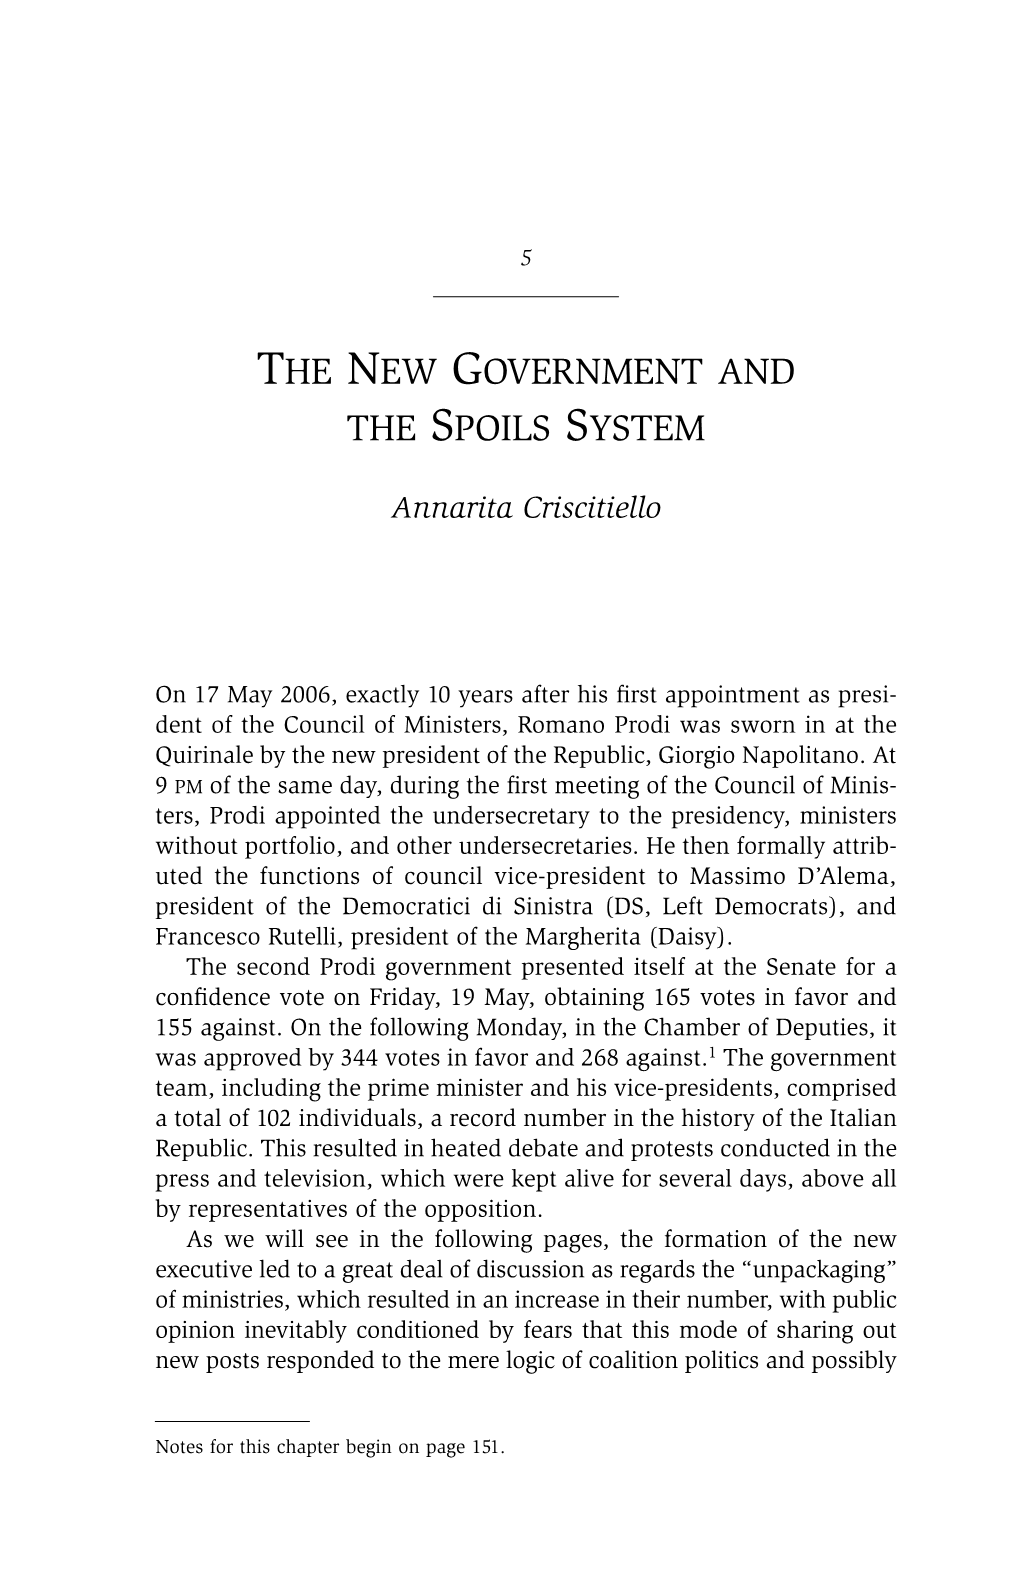 The New Government and the Spoils System